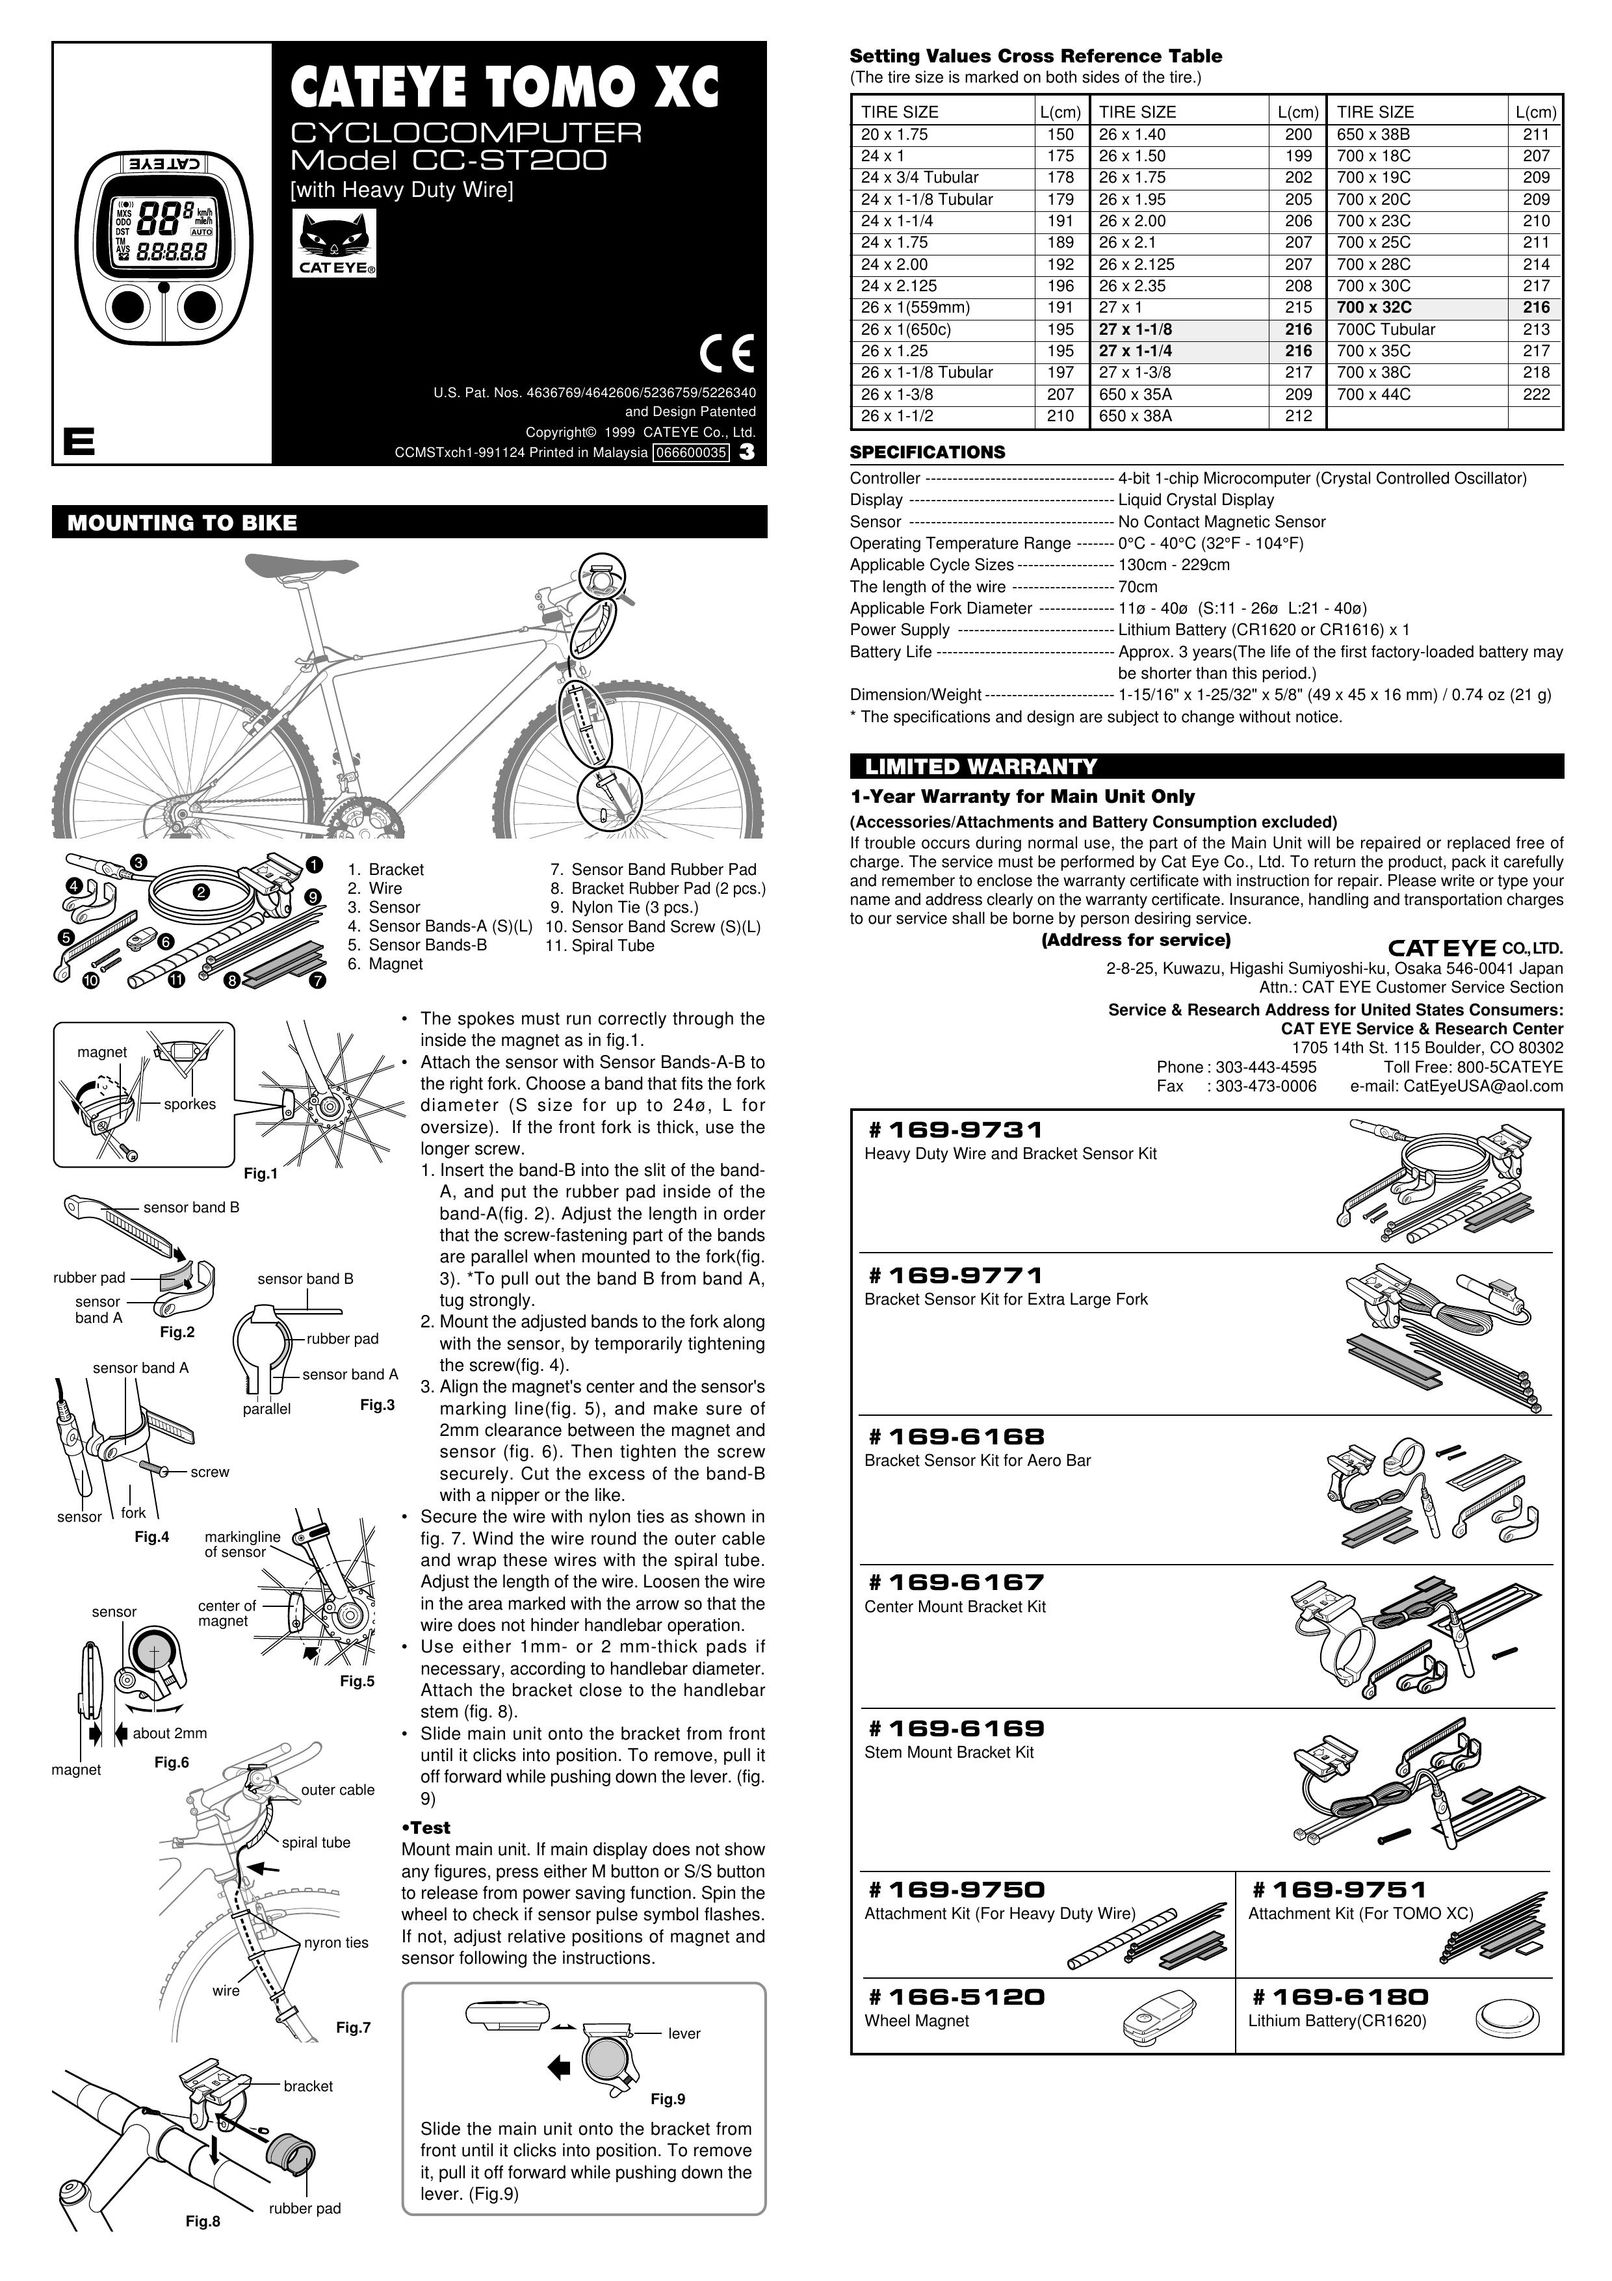 Cateye CC-ST200 Bicycle Accessories User Manual